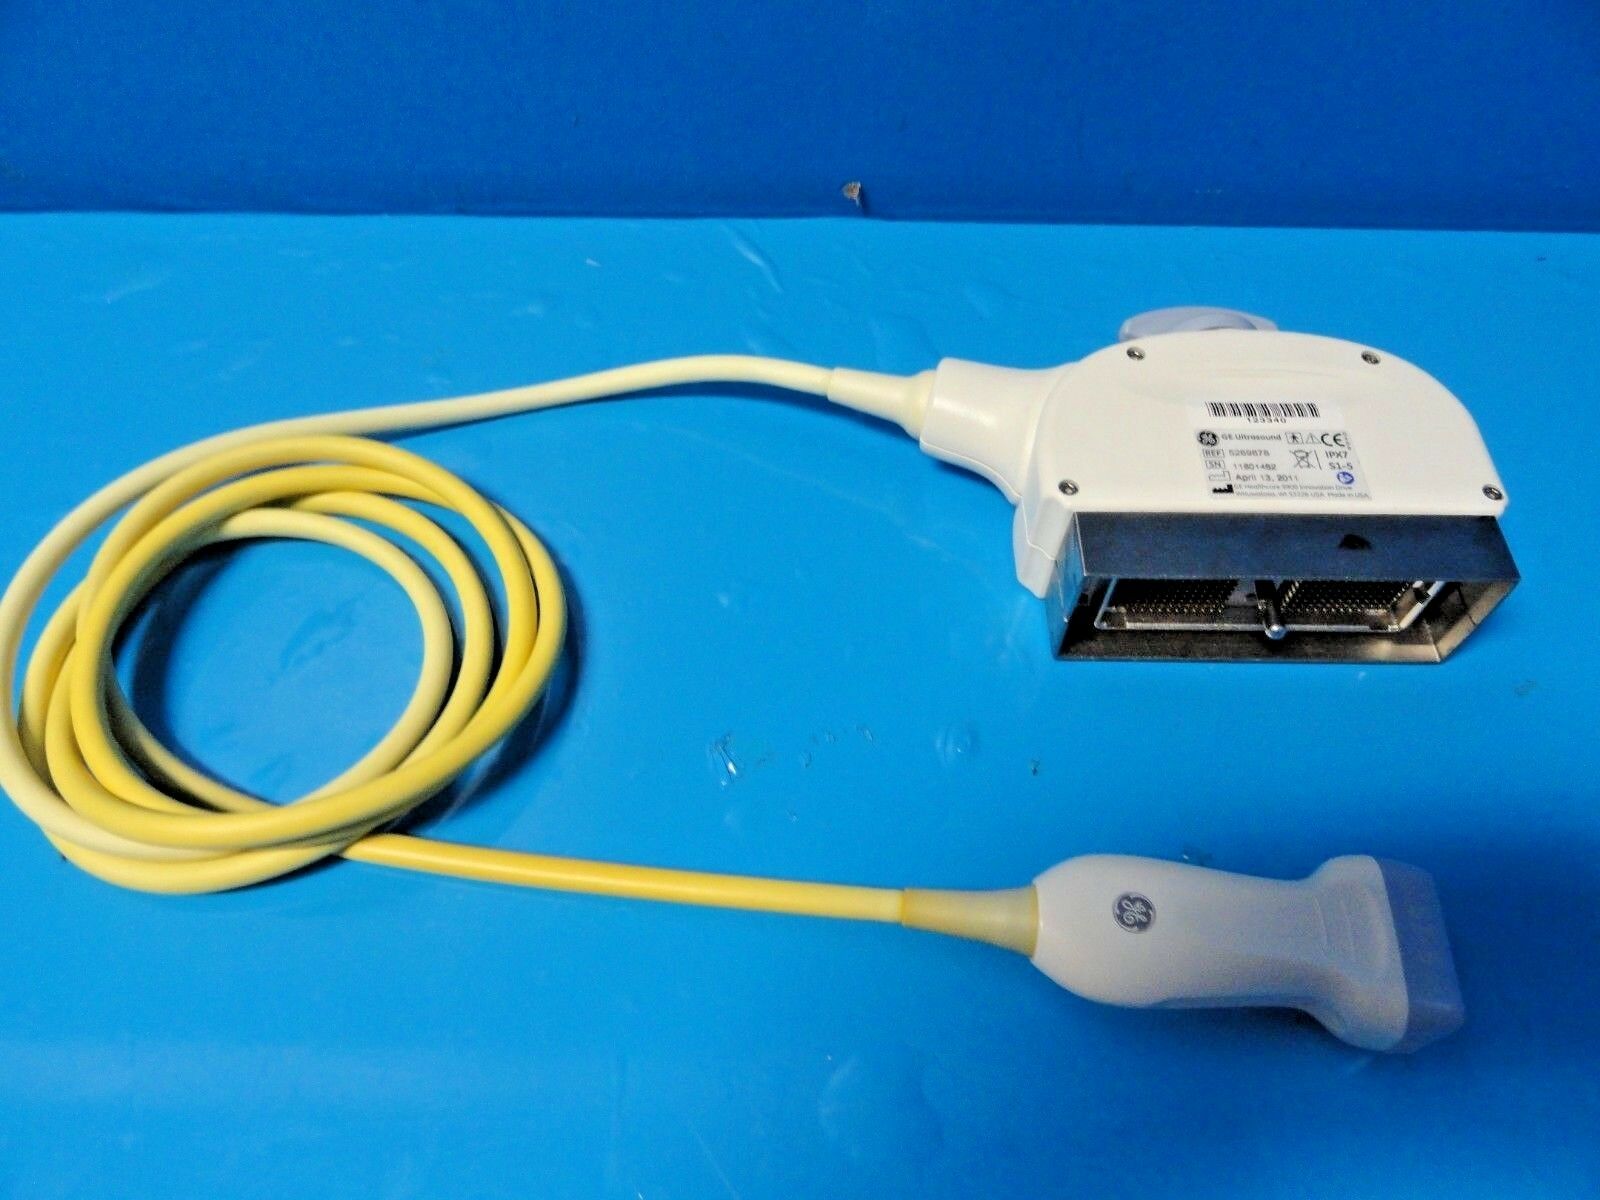 2011 GE S1-5 Sector Array Ultrasound Transducer Probe P/N 5269878   ~15787 DIAGNOSTIC ULTRASOUND MACHINES FOR SALE